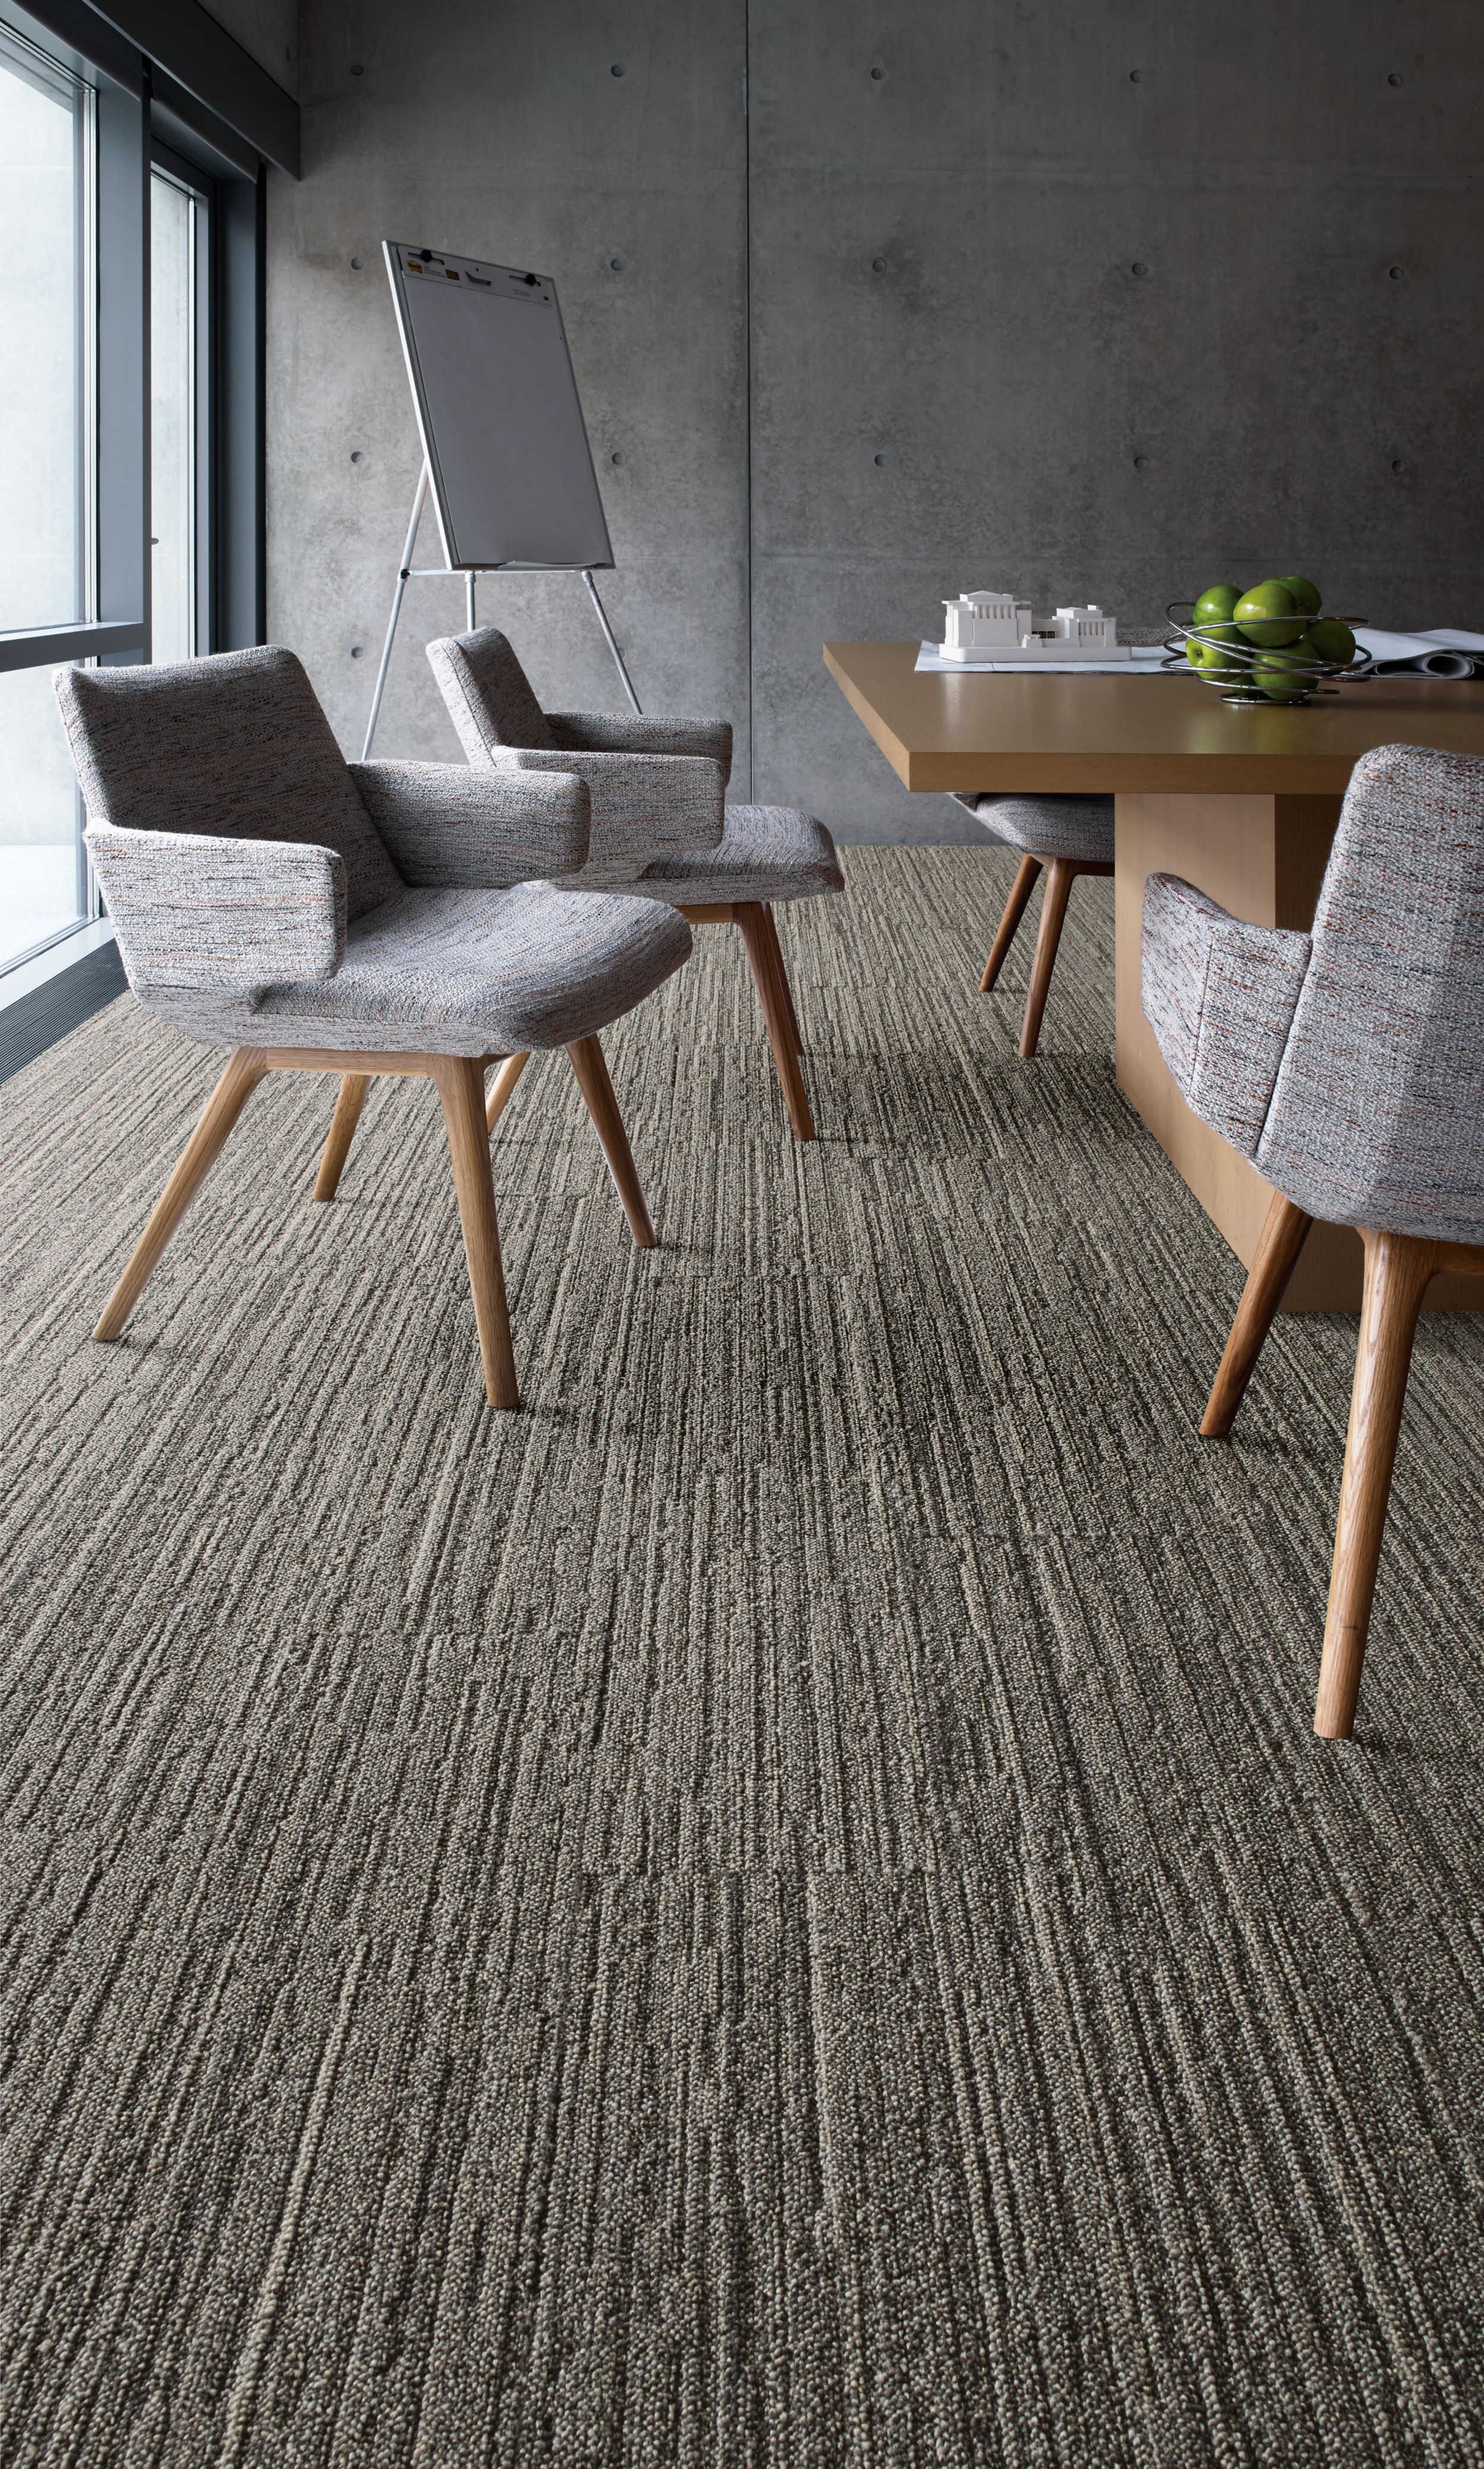 Interface WW880 plank carpet tile in meeting room with table and chairs Bildnummer 5